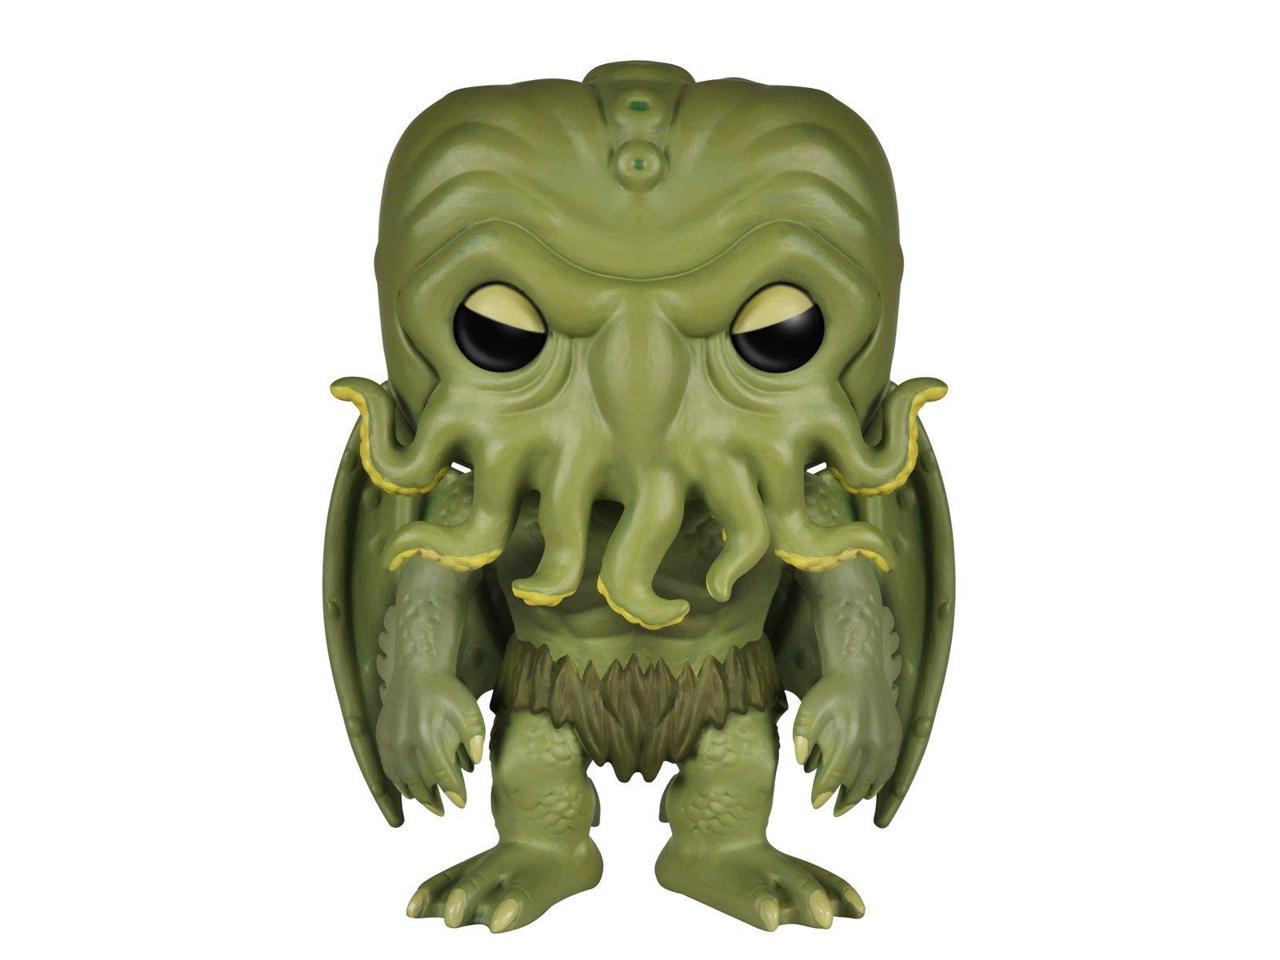 Lovecraft Cthulhu Action Figure Call of Cthulhu Vinyl Toy Model Funko Pop 